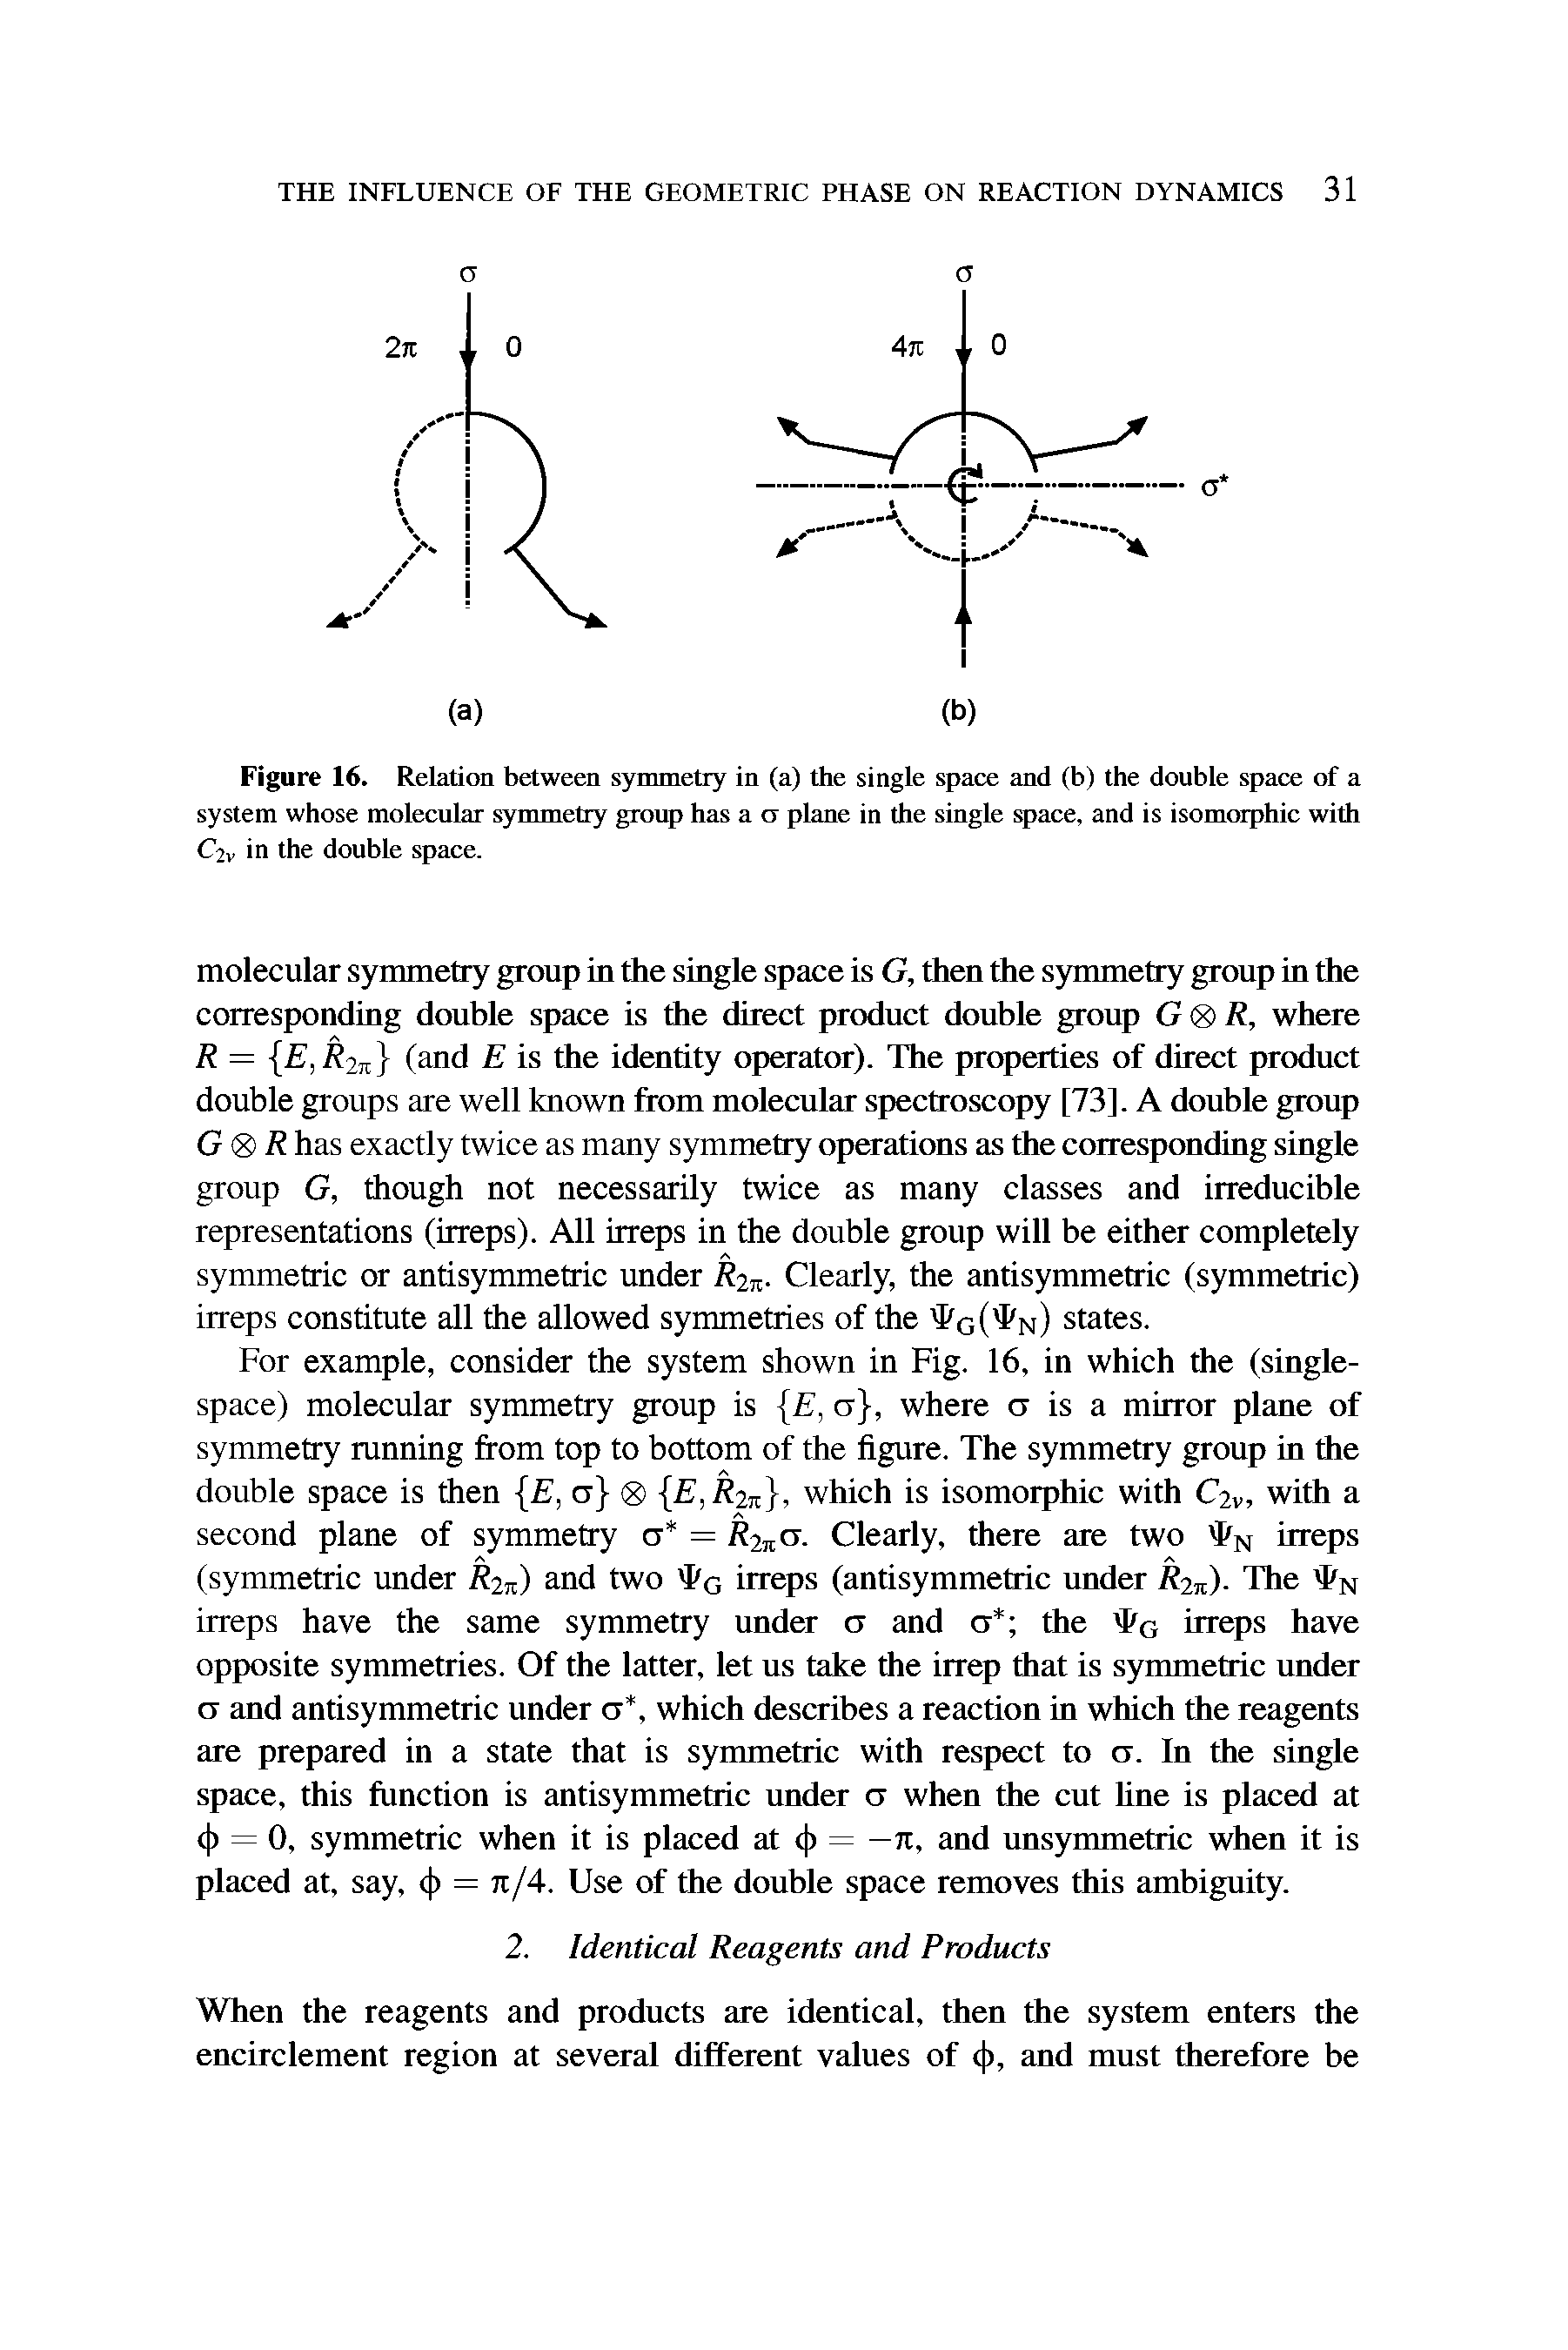 Figure 16, Relation between symmetry in (a) the single space and (b) the double space of a system whose molecular symmetry group has a a plane in the single space, and is isomorphic with C2v in the double space.